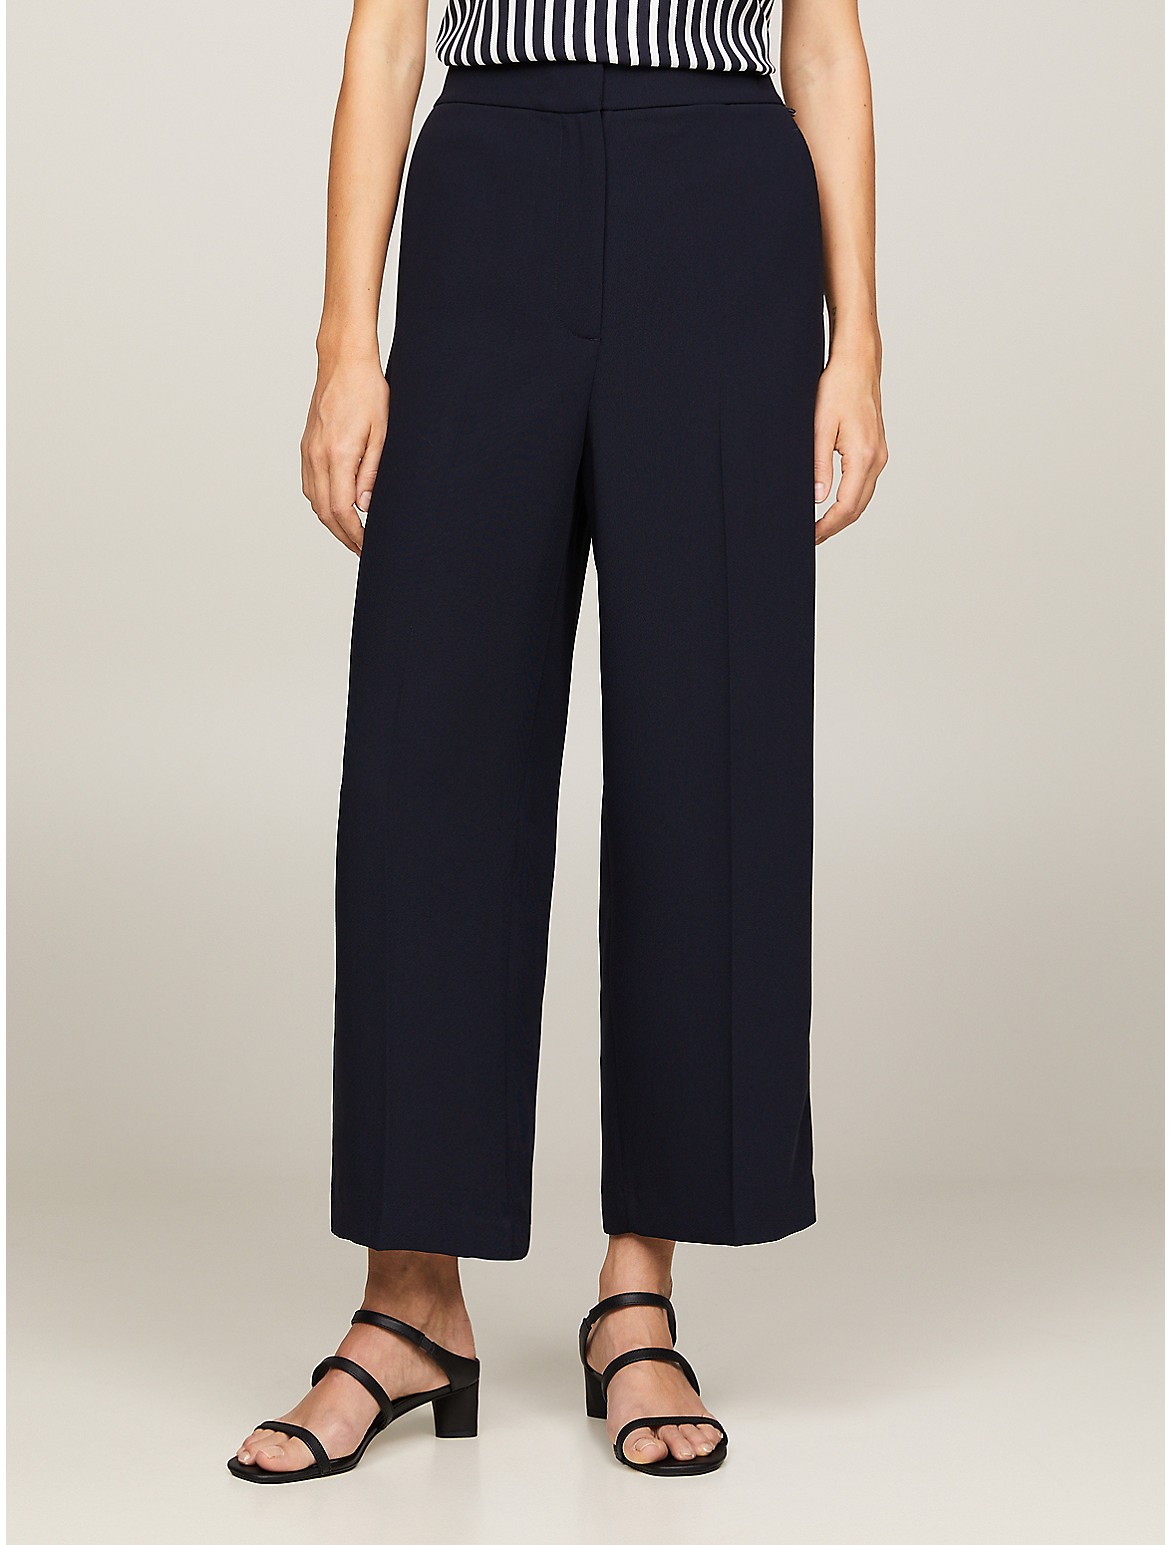 Tommy Hilfiger Women's Wide-Leg Cropped Twill Pant